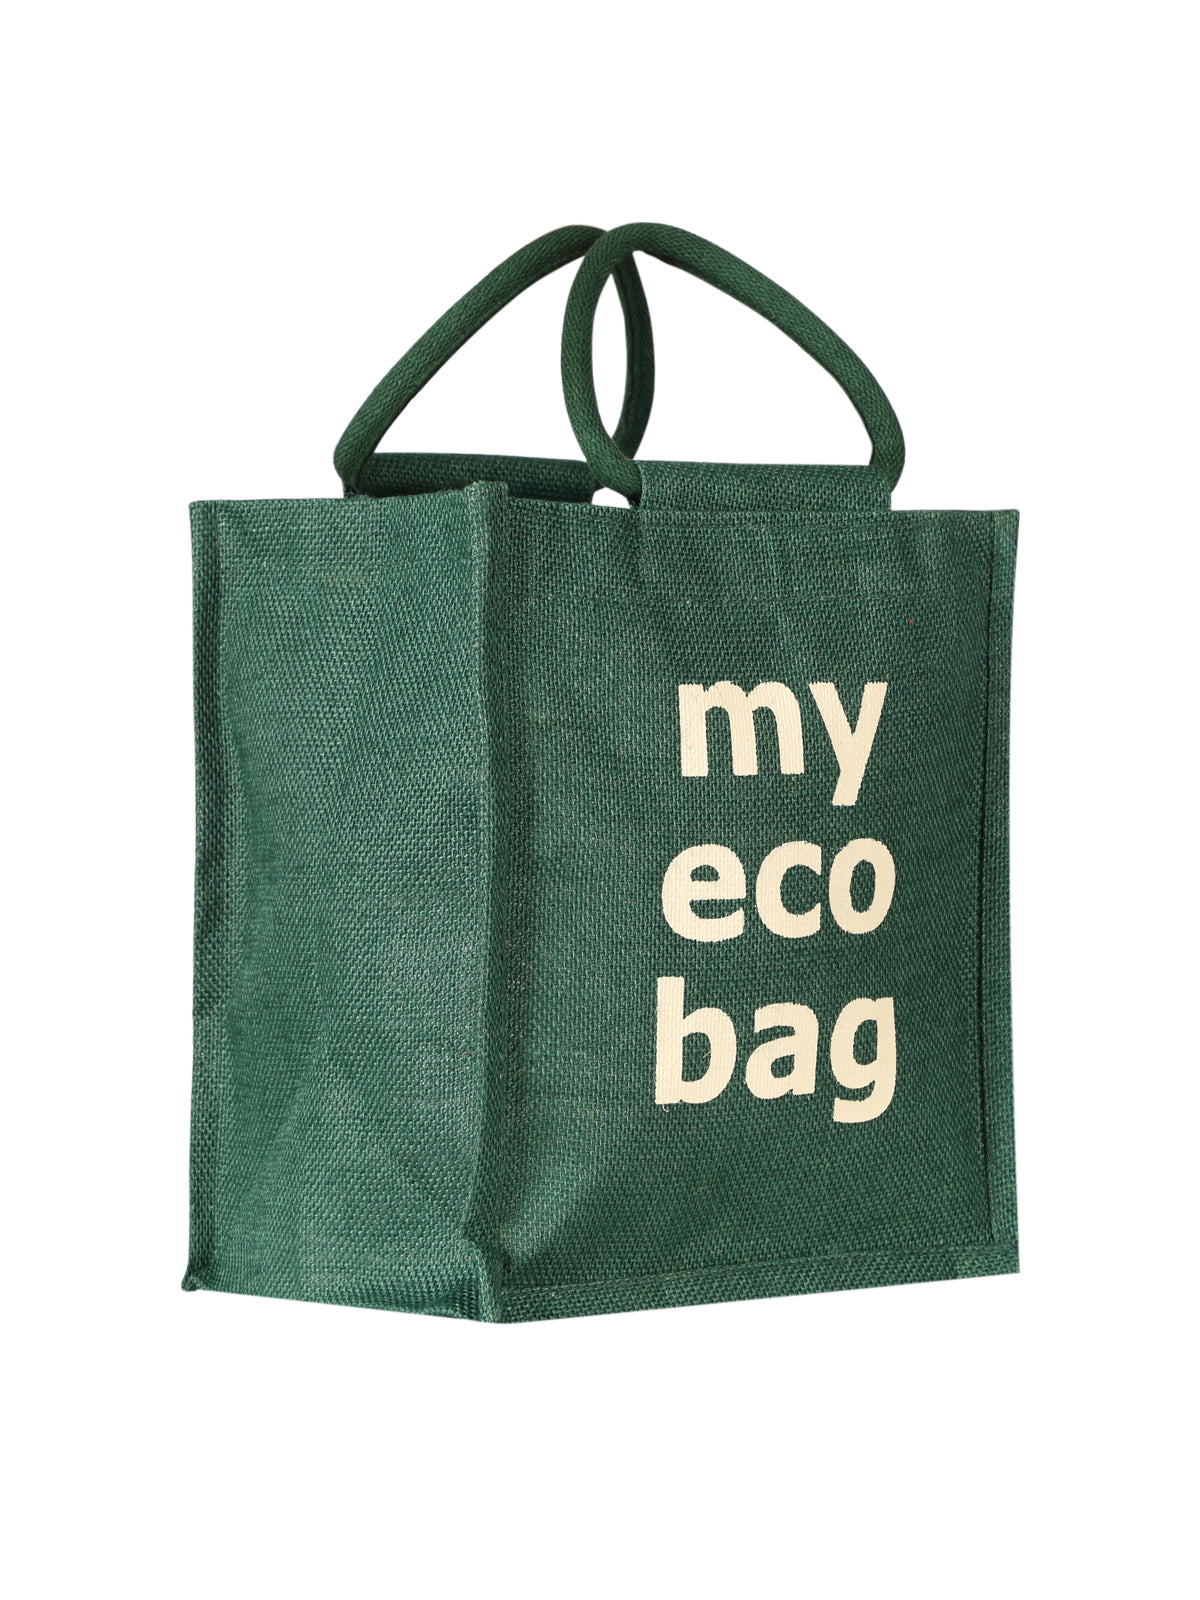 Amazon.com: Earthwise Reusable Grocery Bag Xlarge Made from Recycled  Plastic Bottles (Rpet) Eco Friendly Heavy Duty Material (Pack of 5) :  Health & Household